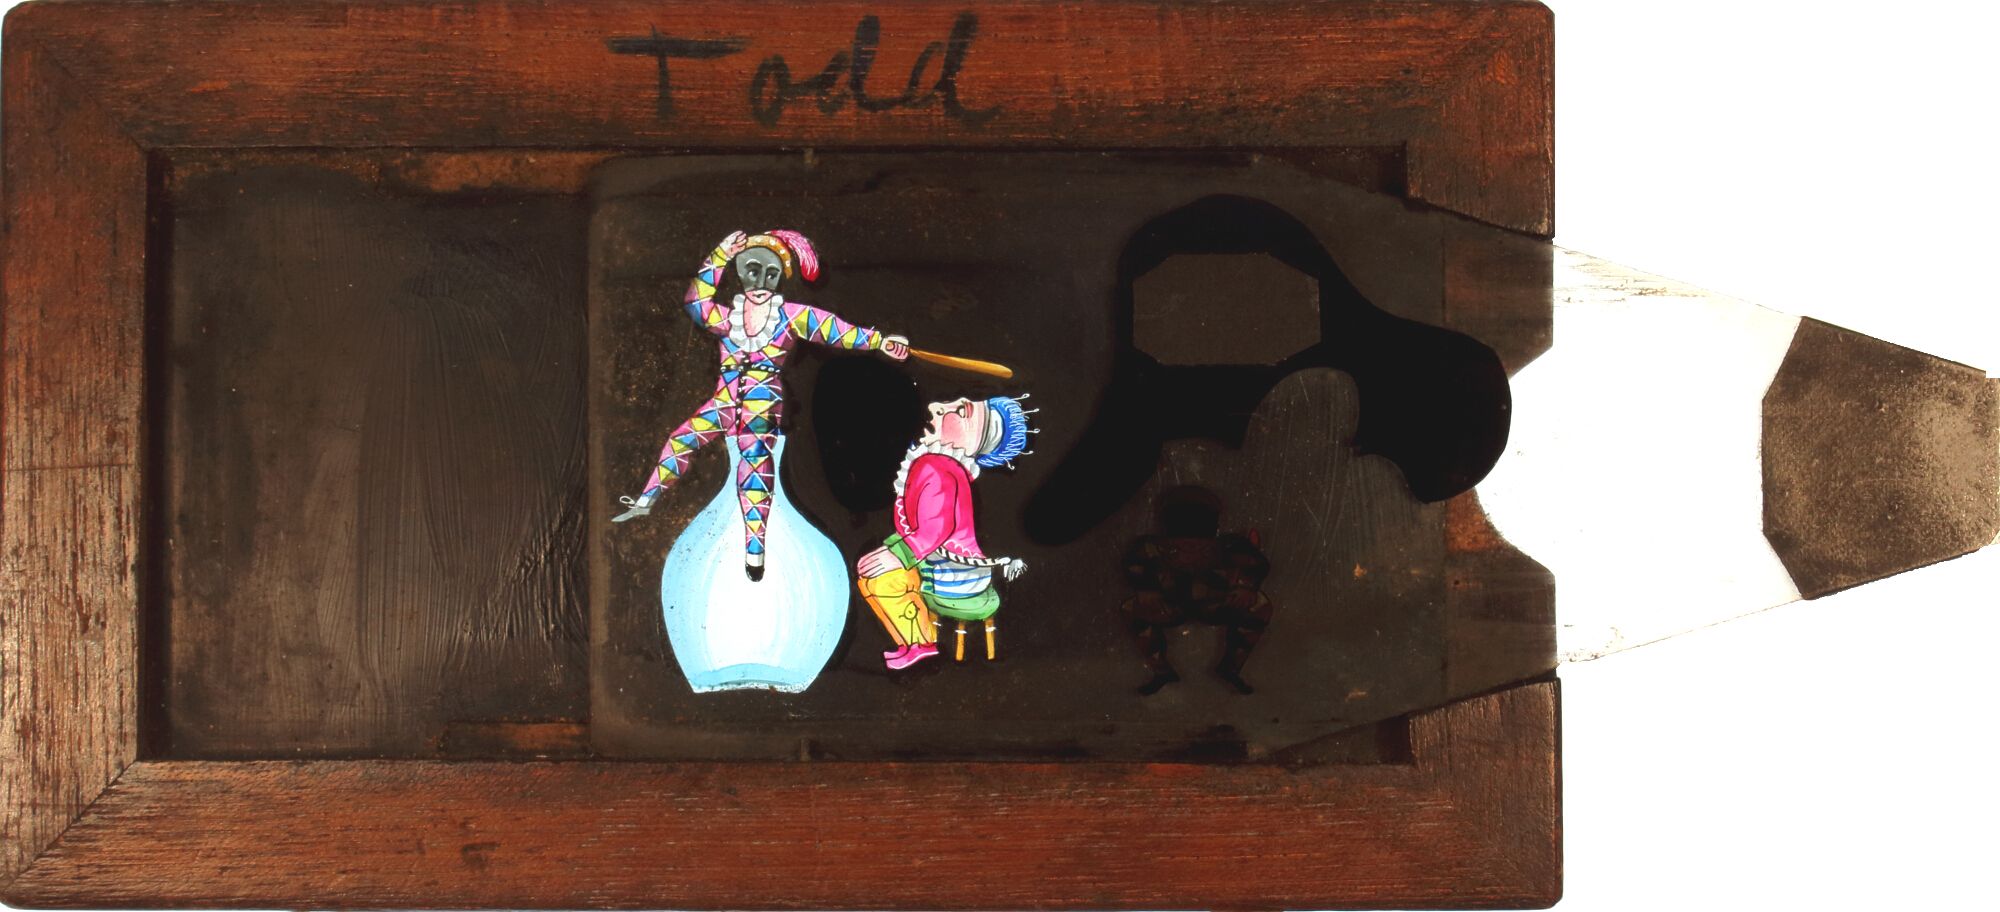 'Harlequin jumps out of bottle' Maker unknown (6 3/4 x 4 x 3/8 inches), single slip - Image 2 of 2